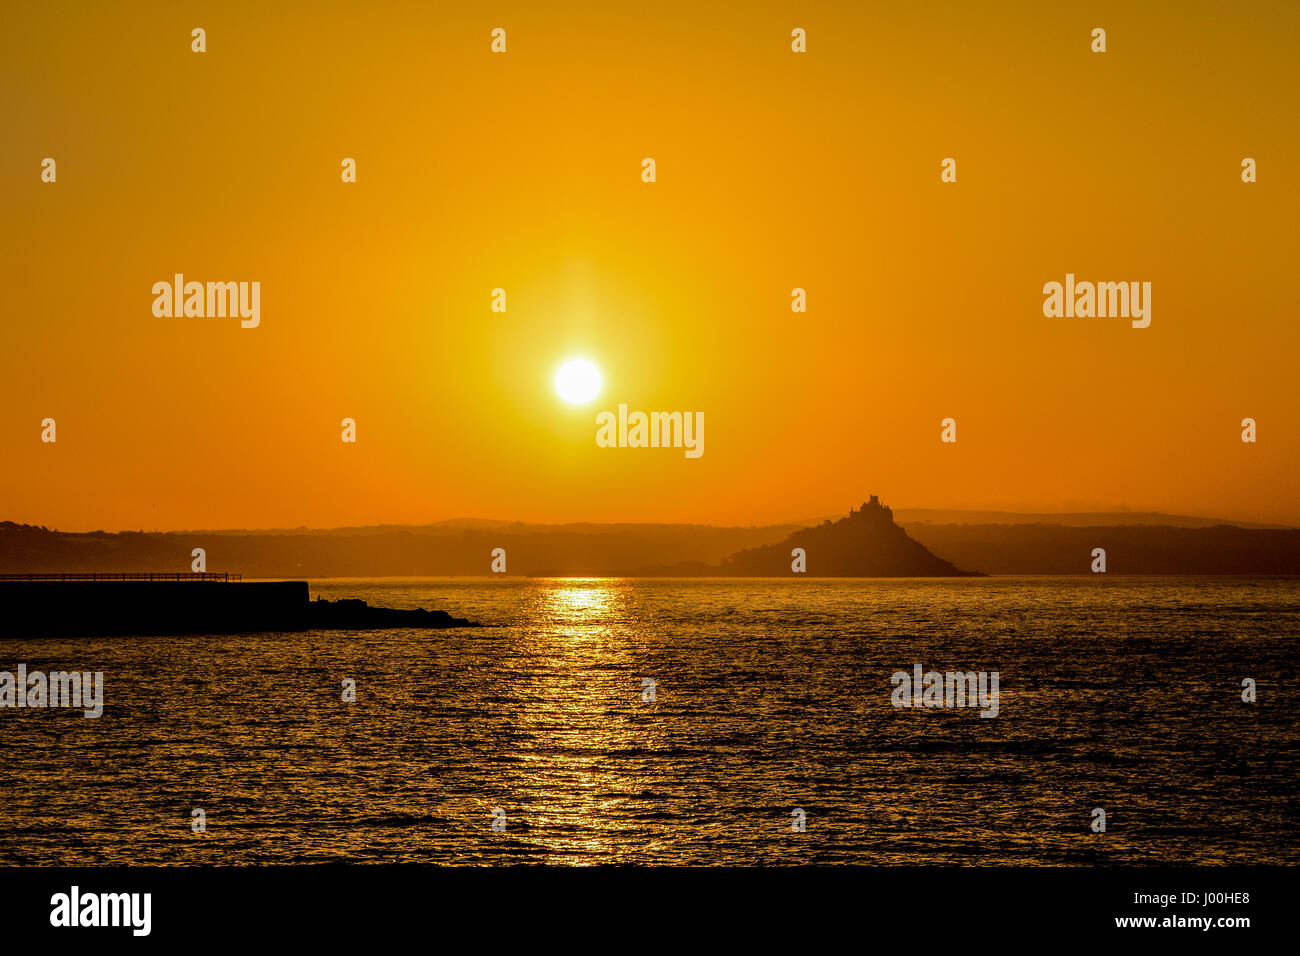 Penzance, Cornwall, UK. 8th Apr, 2017. UK Weather. The sun rises over Mounts Bay, and the Jubilee Pool - the outdoor Lido swimming pool, which has been closed for more refurbishment. Early morning haze lngered on the horizon, bringing a vivid orange glow around the sun. Credit: Simon Maycock/Alamy Live News Stock Photo